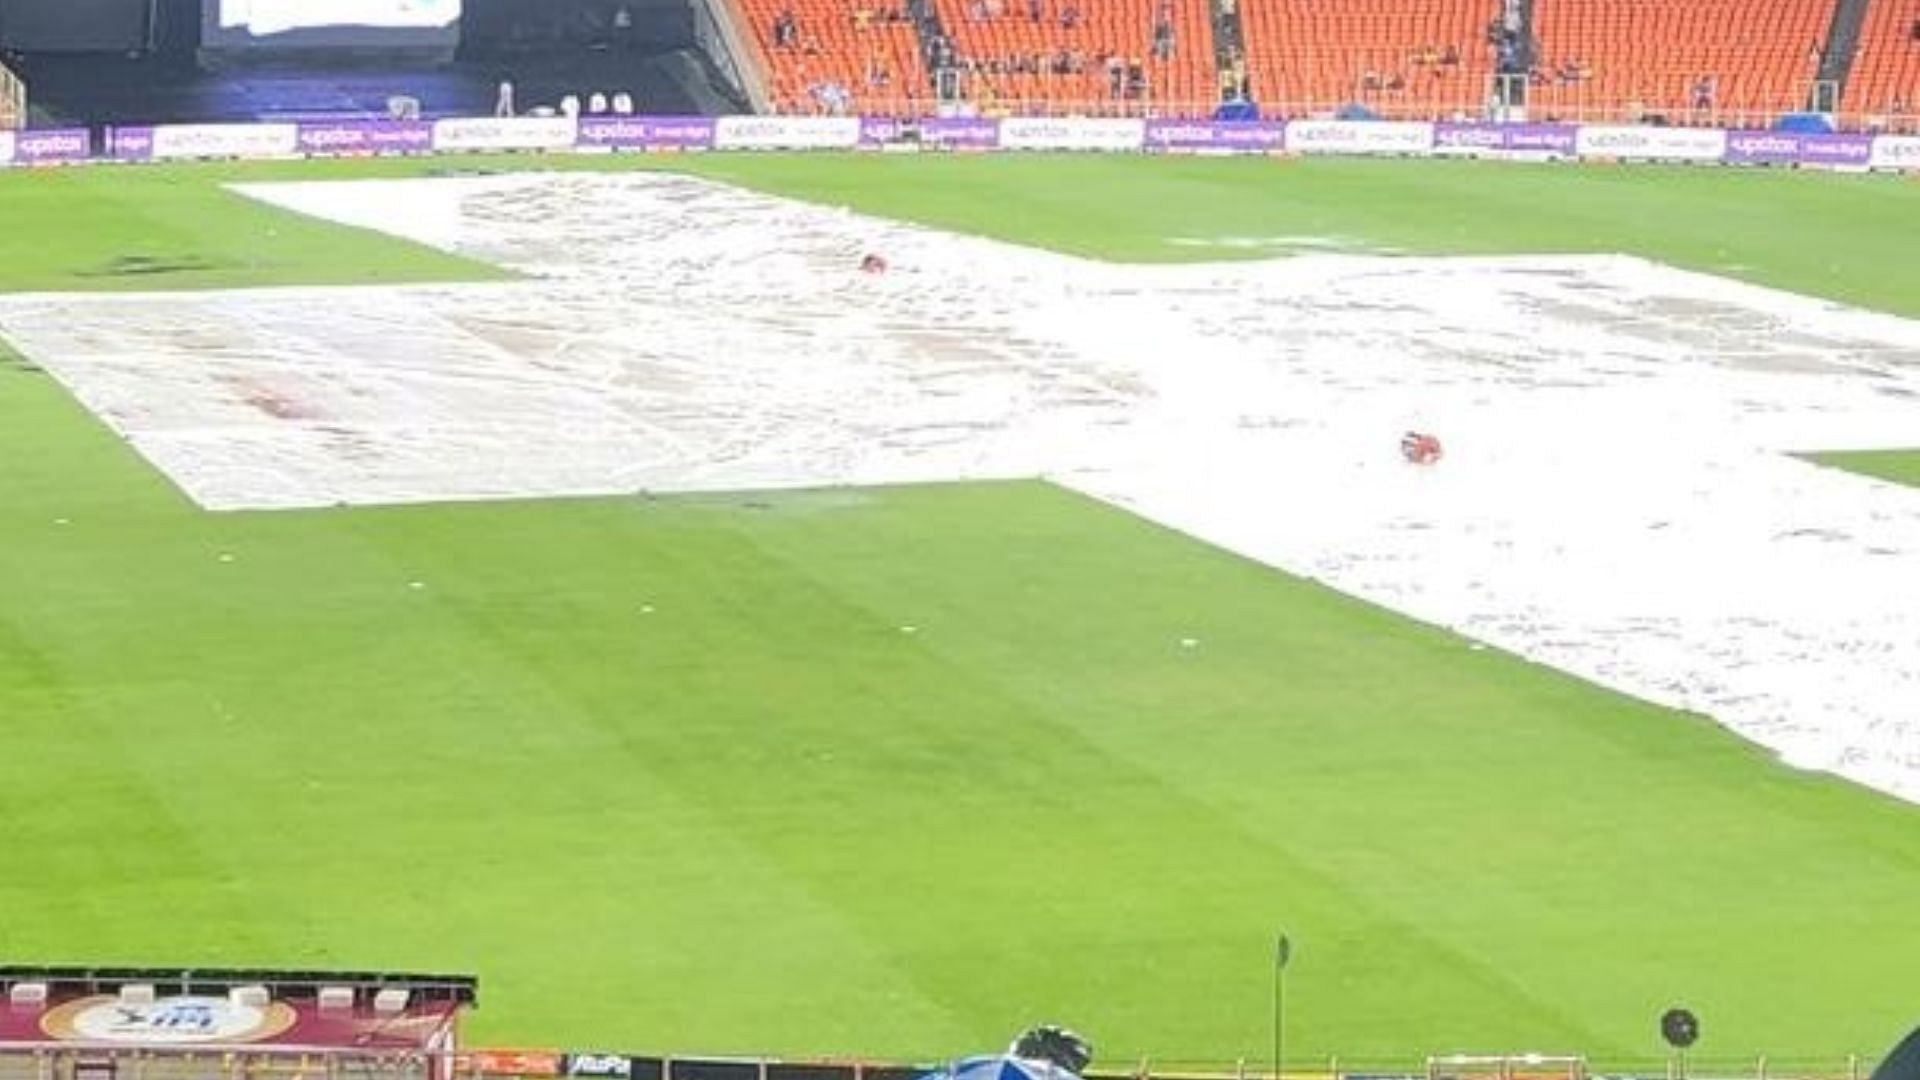 No play was possible on May 28th due to rain, leading to the IPL 2023 final being postponed by a day (P.C.:Twitter)